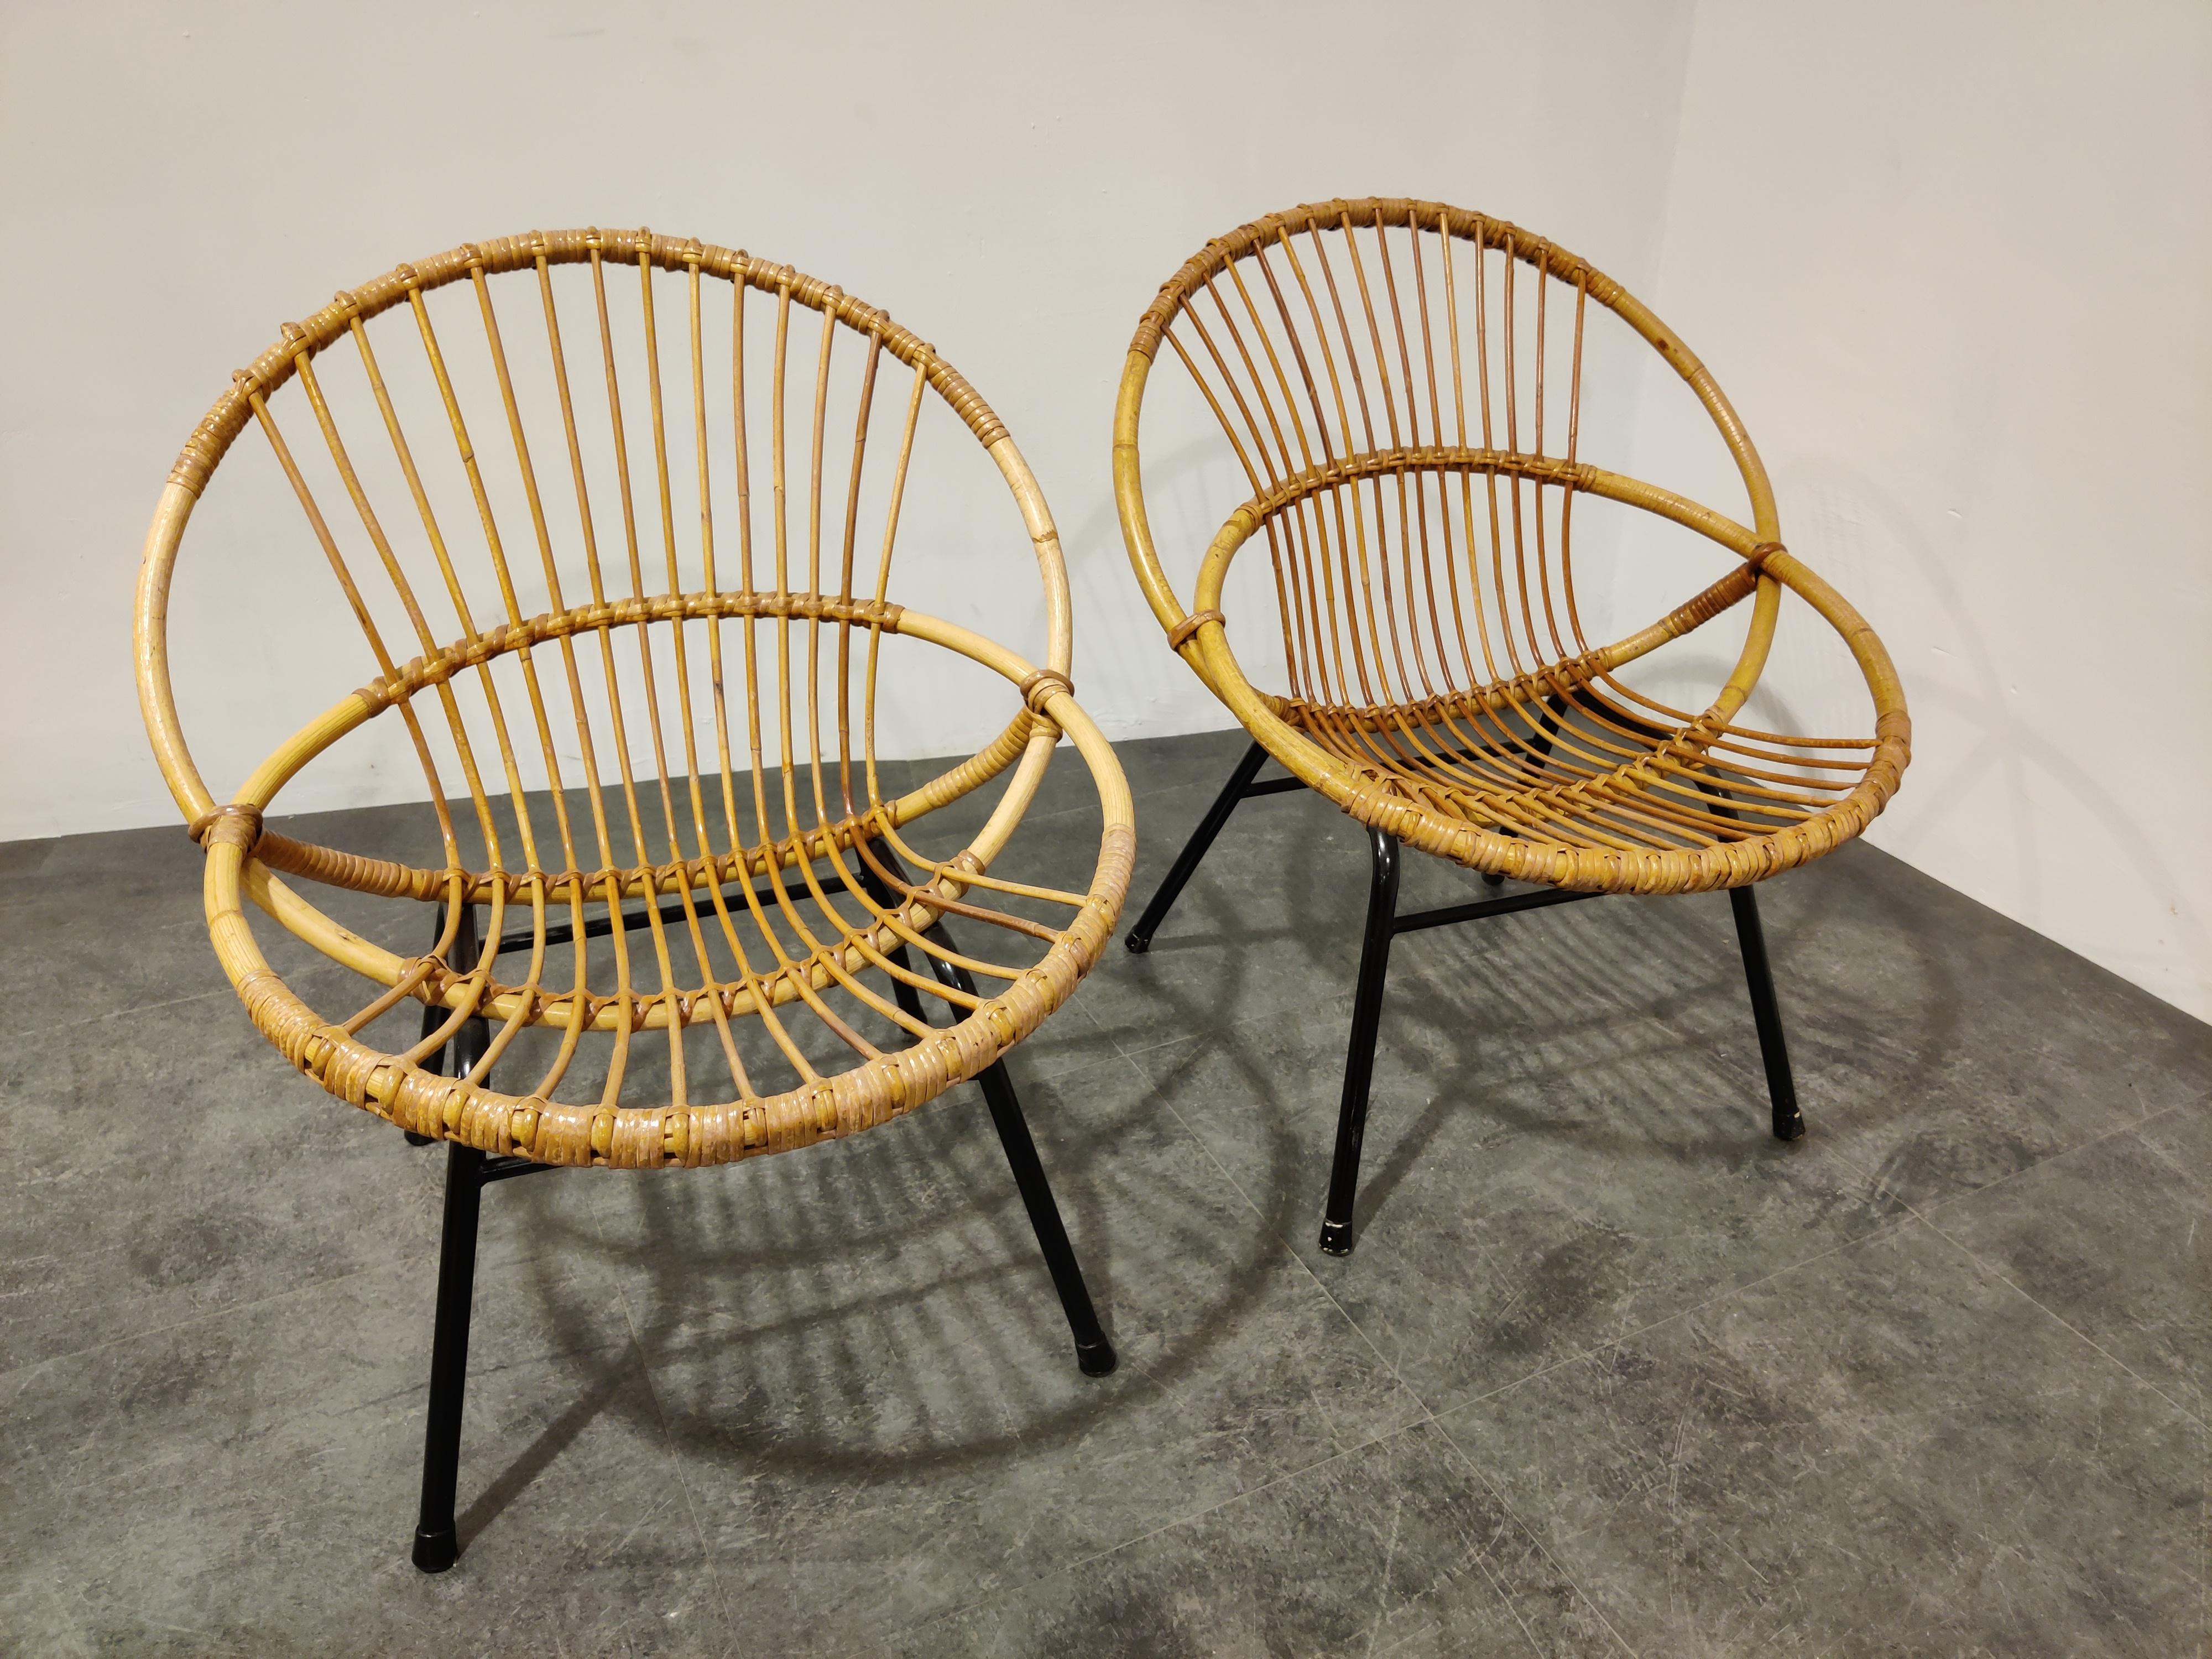 Beautiful midcentury rattan chair set by Rohé Noordwolde.

The set consists of two lounge chairs, a two-seat bench and a side table.

Great patio set, garden set or even living room set.

Lovely design mounted on a black lacquered metal